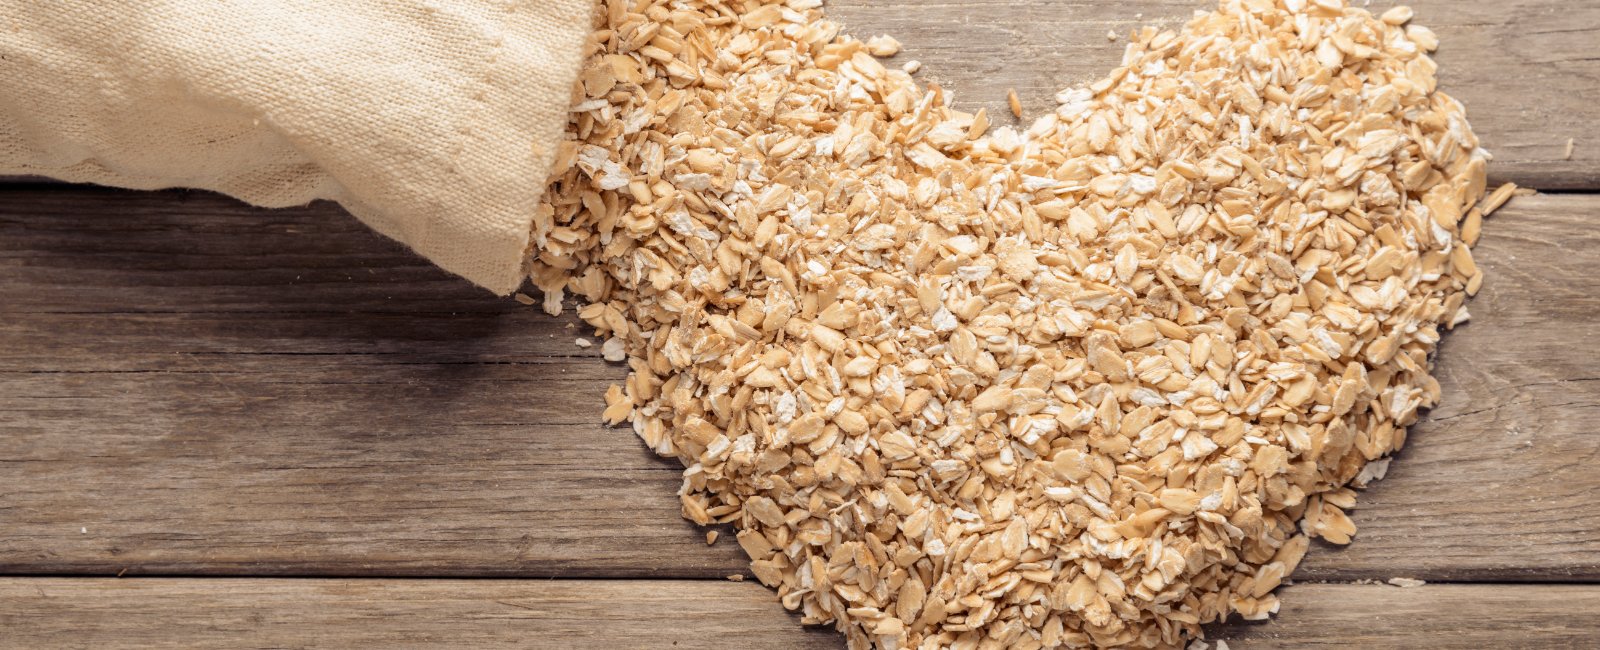 BENEFITS OF OATS FOR CHOLESTEROL